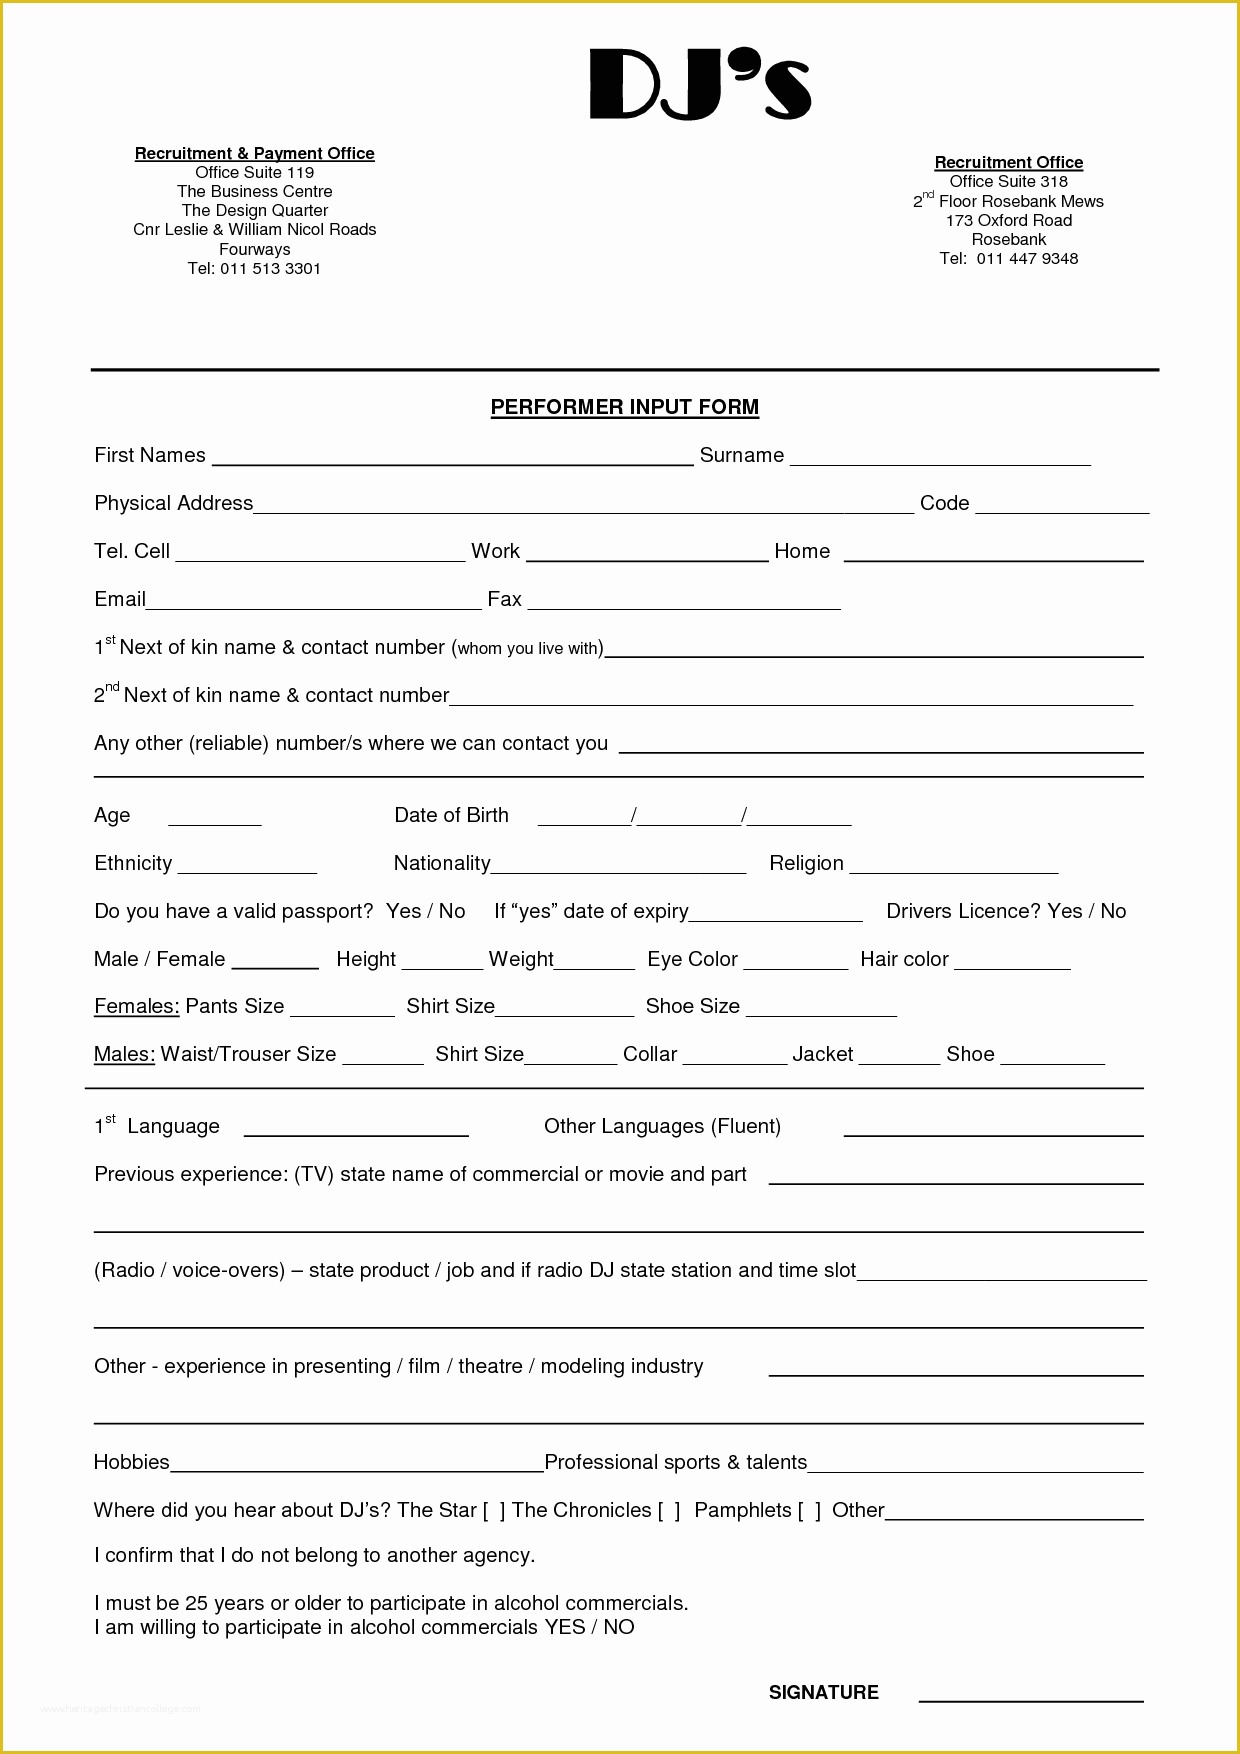 Dj Contract Template Free Of Wedding Dj Contract Templateregularmidwesterners